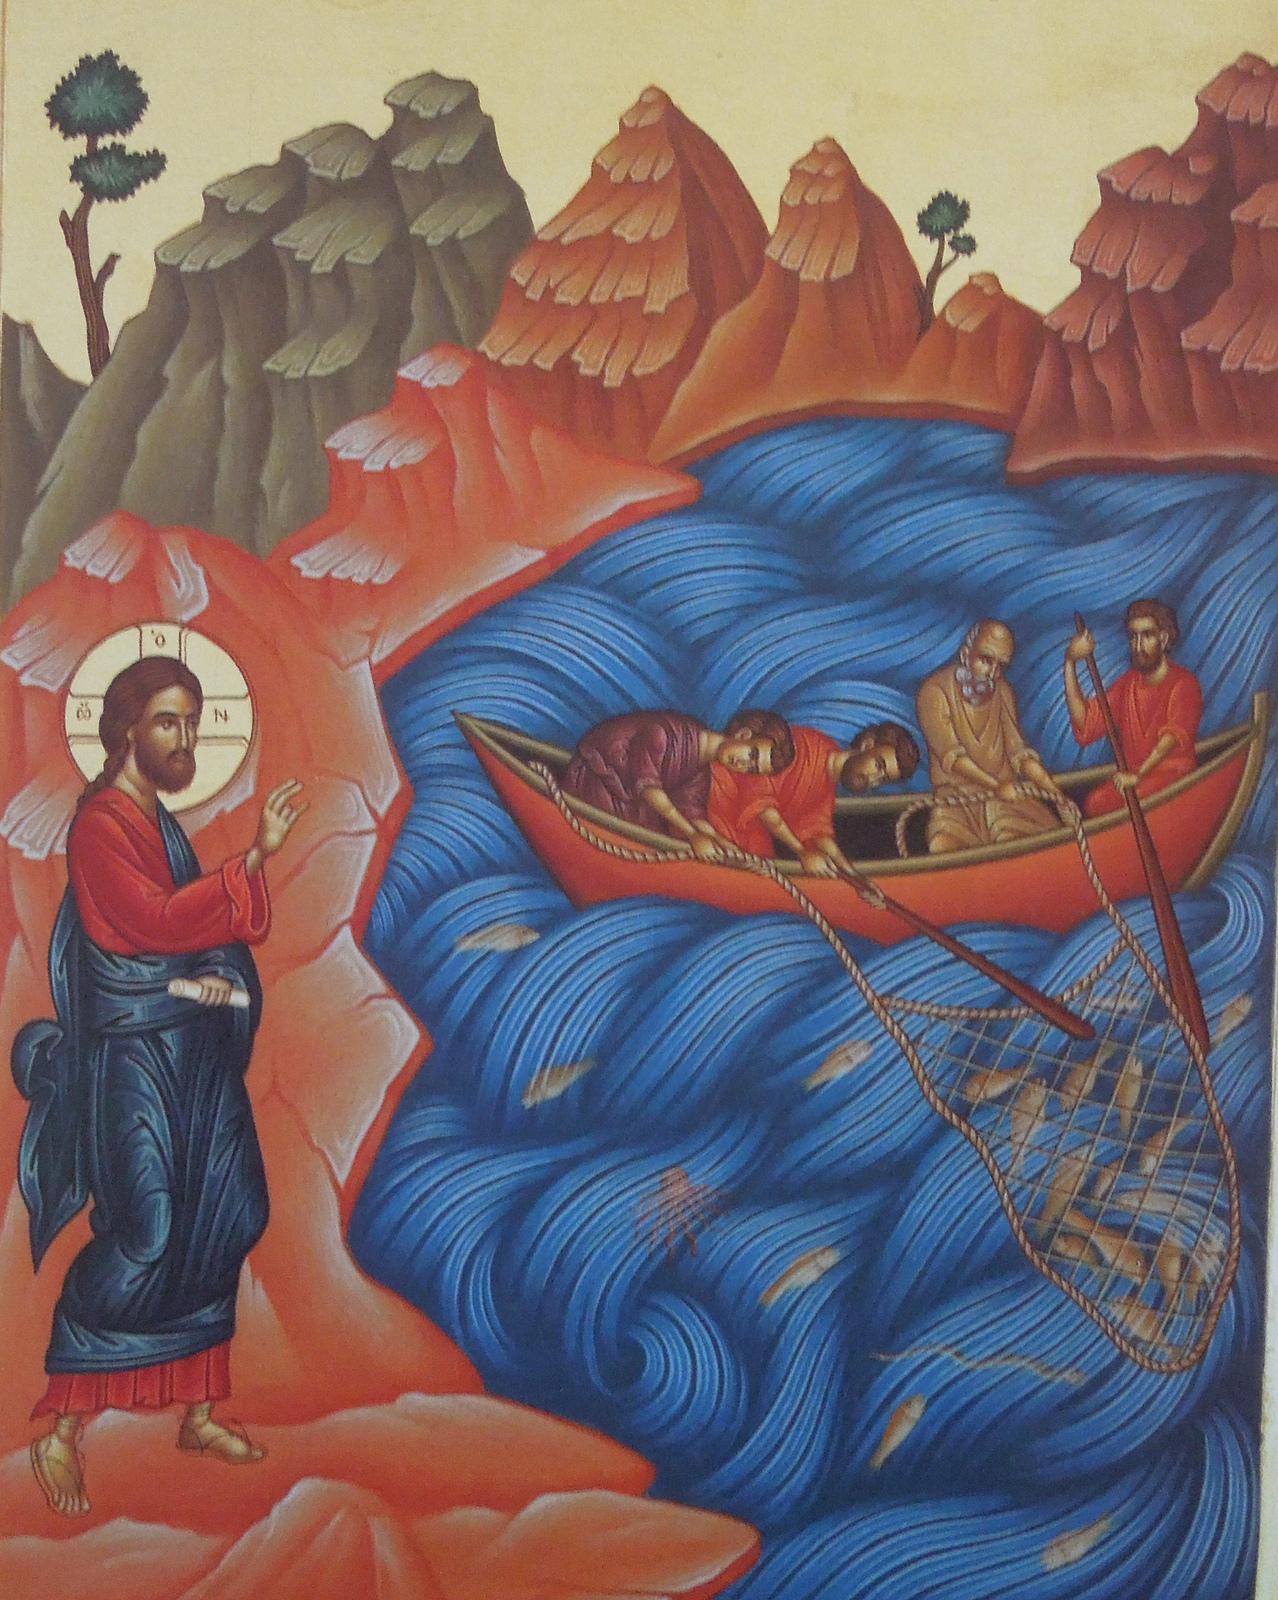 Icon fishers of men by bobosh_t, on Flickr (CC BY-SA 2.0)